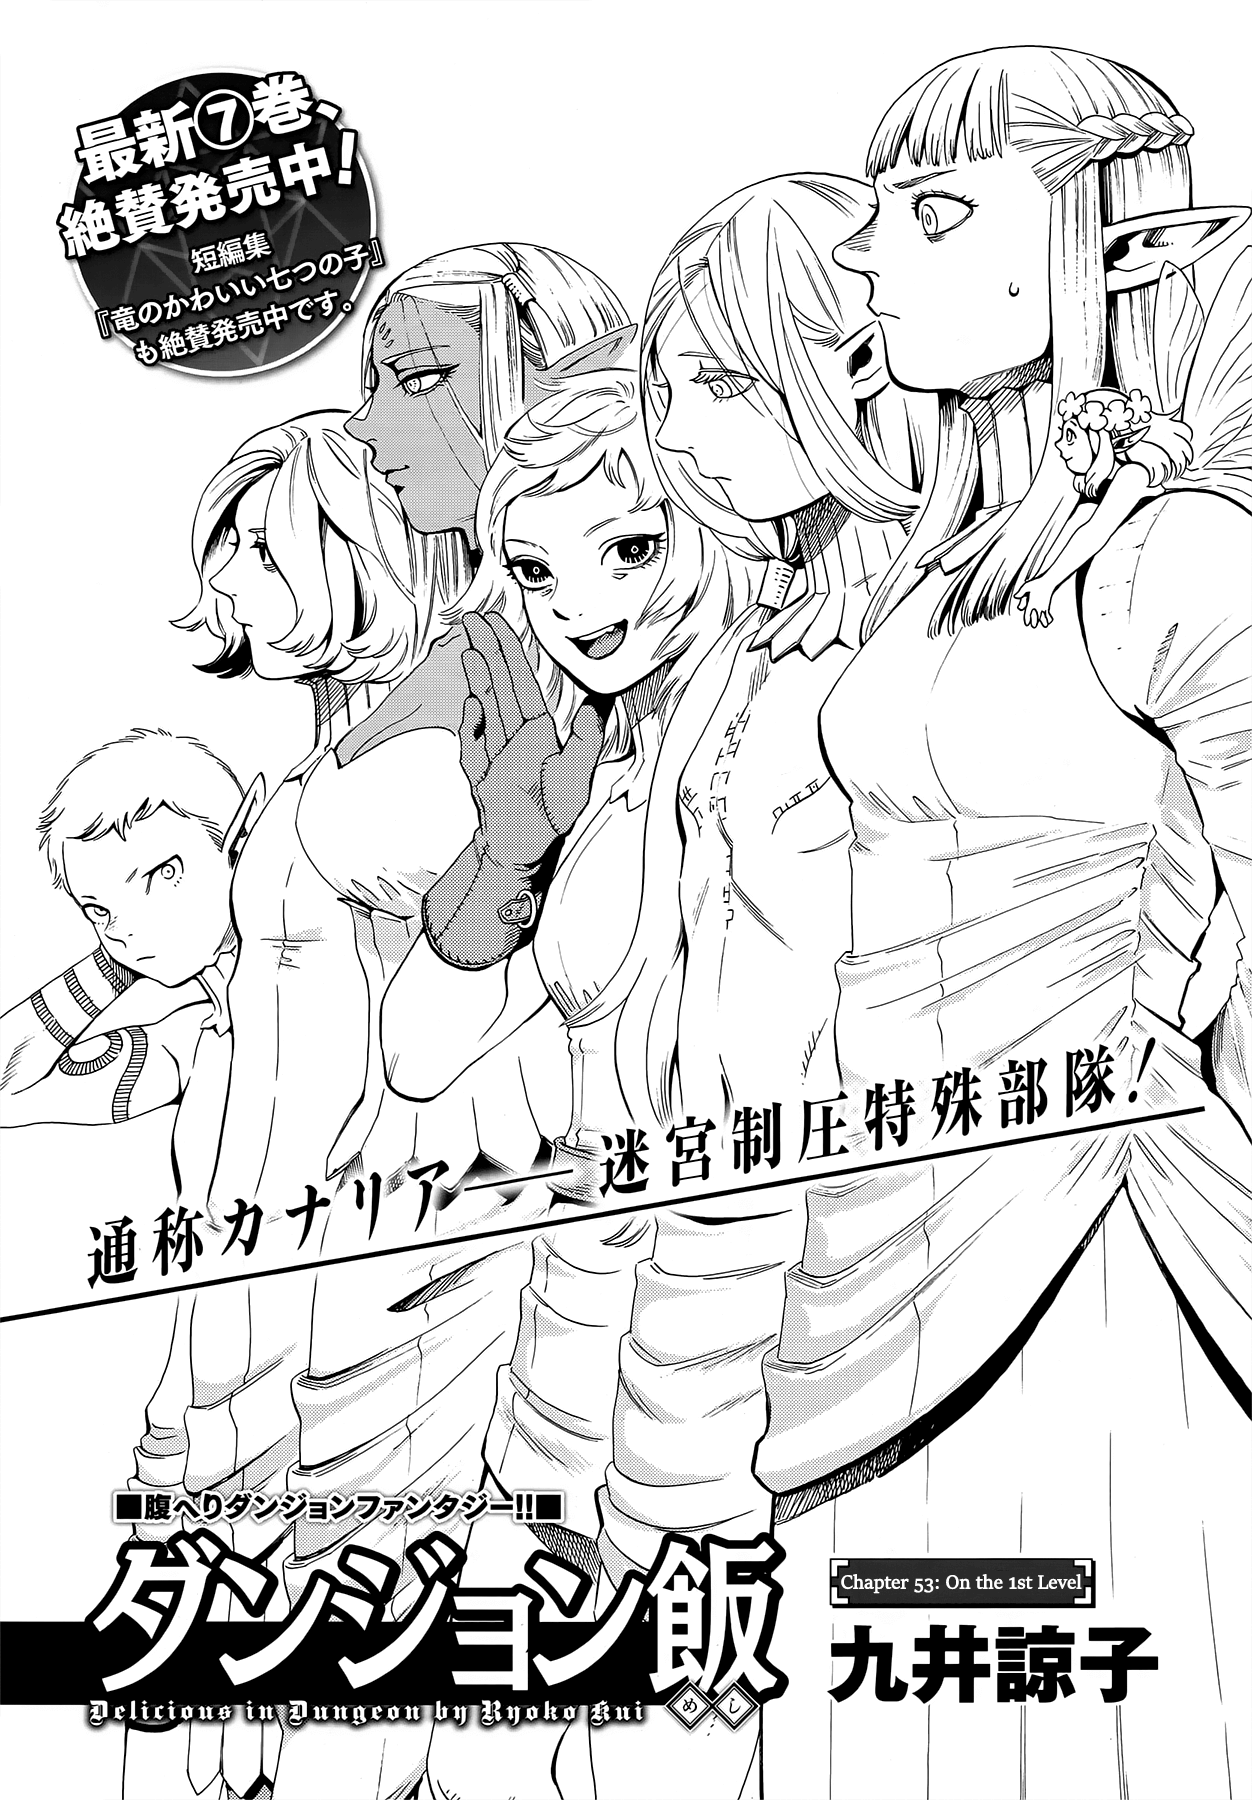 Dungeon Meshi Vol.8-Chapter.53-On-the-1st-Level Image